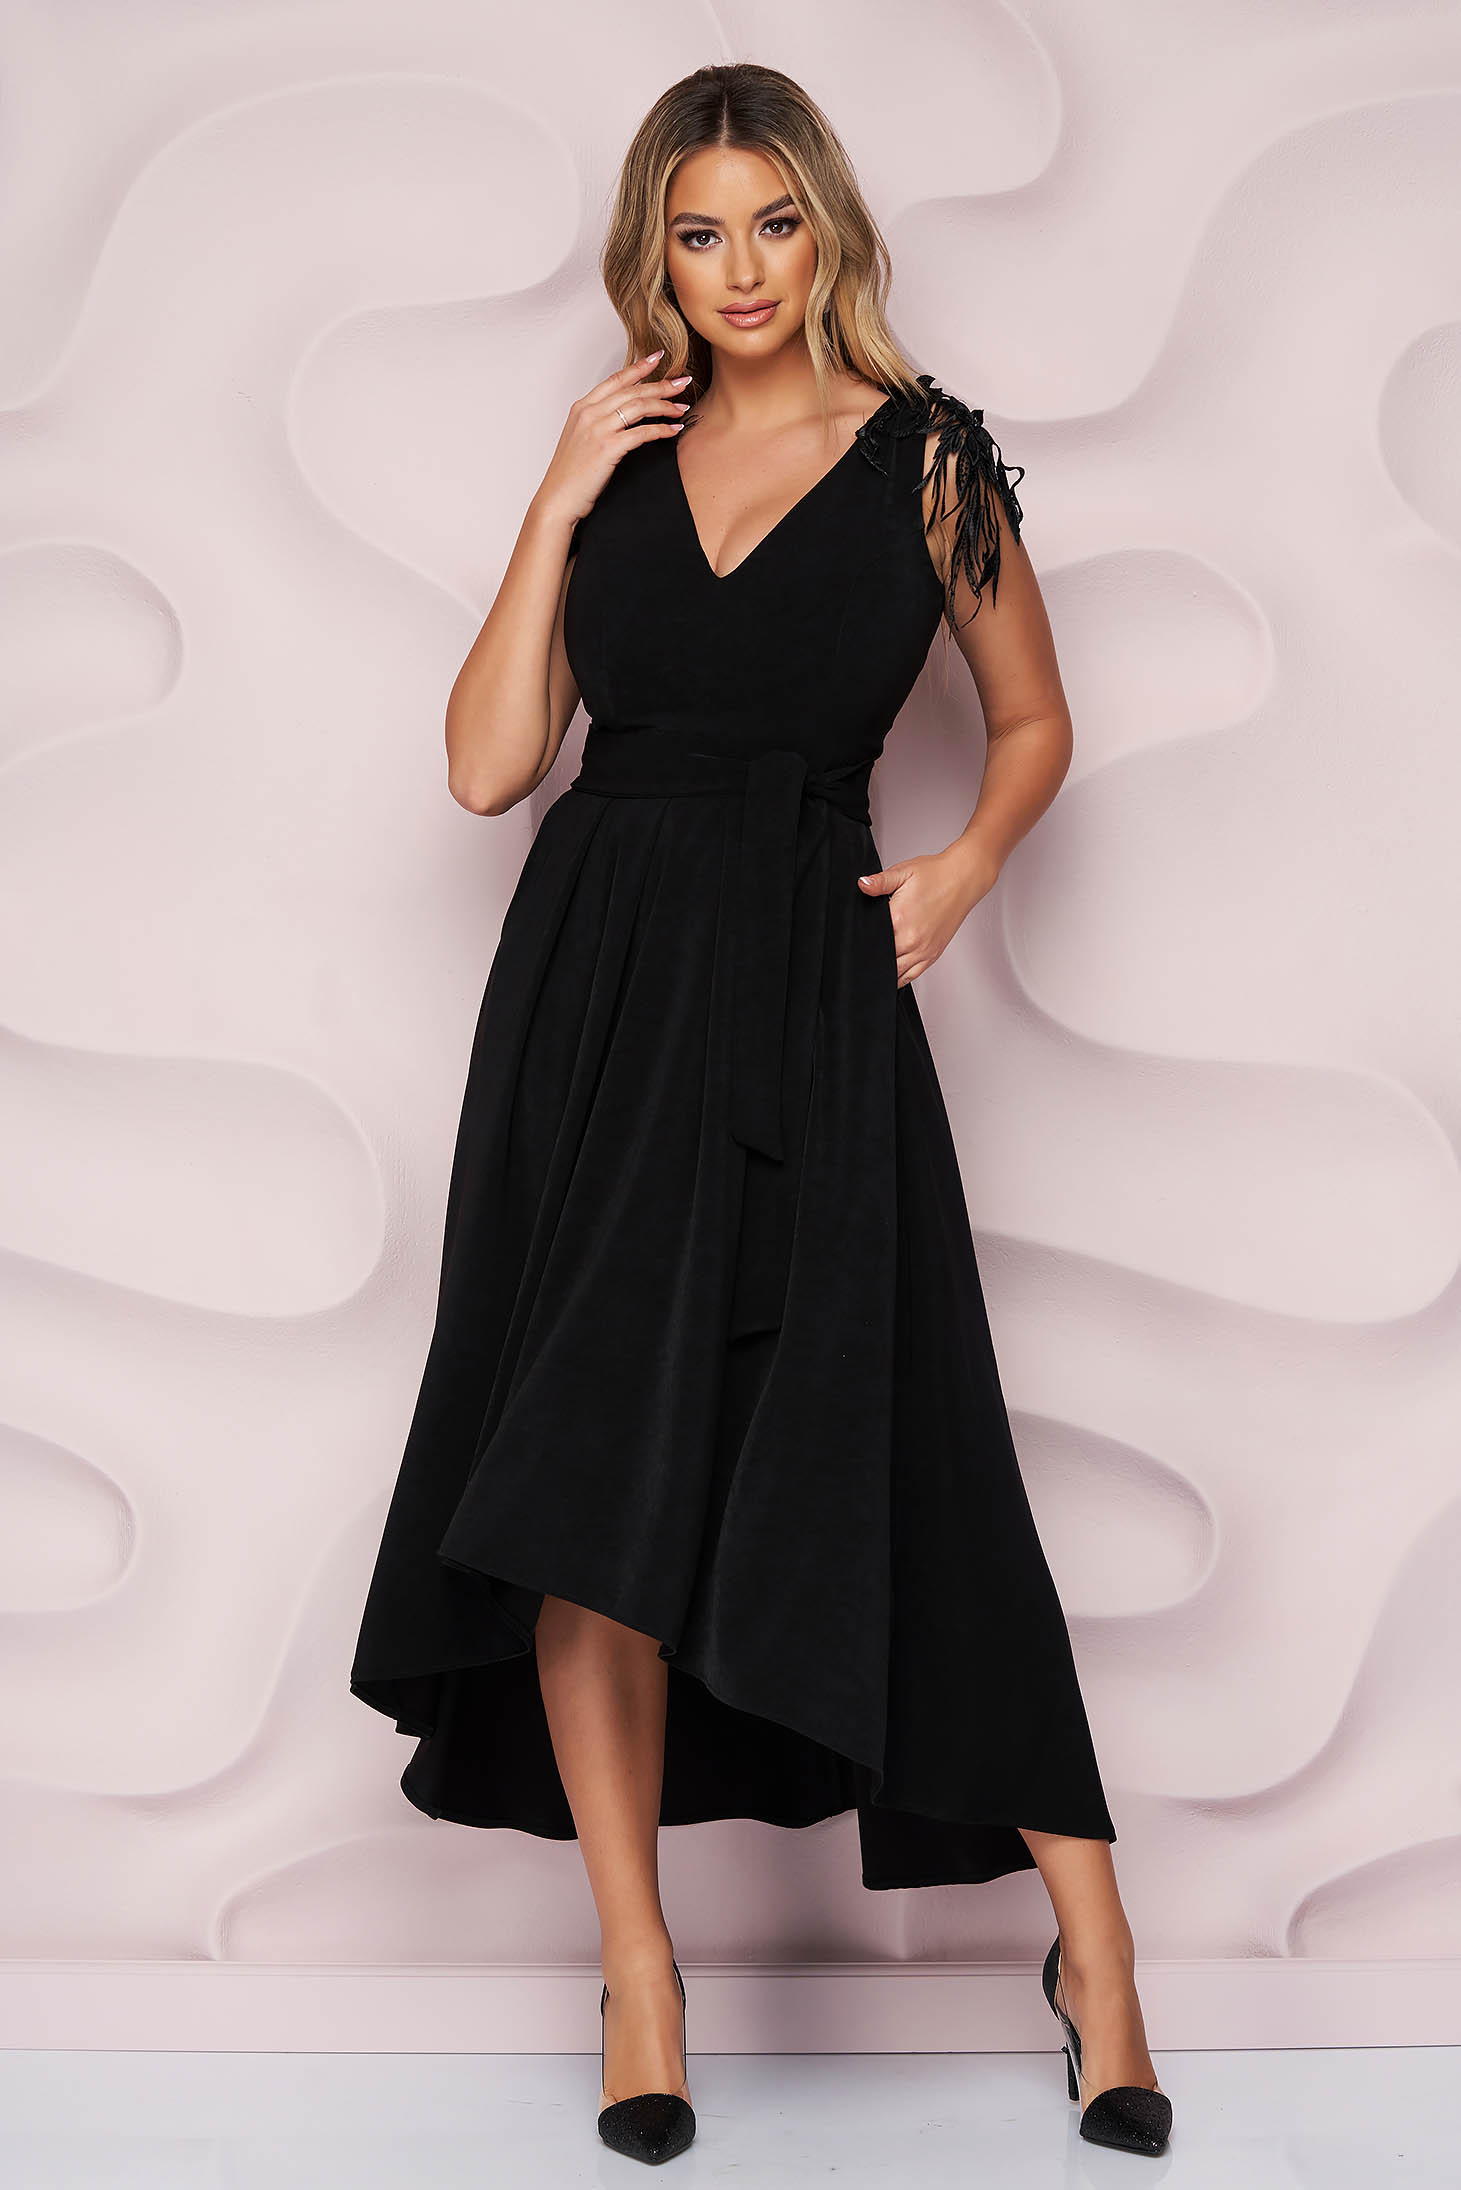 Dress StarShinerS black asymmetrical occasional cloche from satin sleeveless with lace details